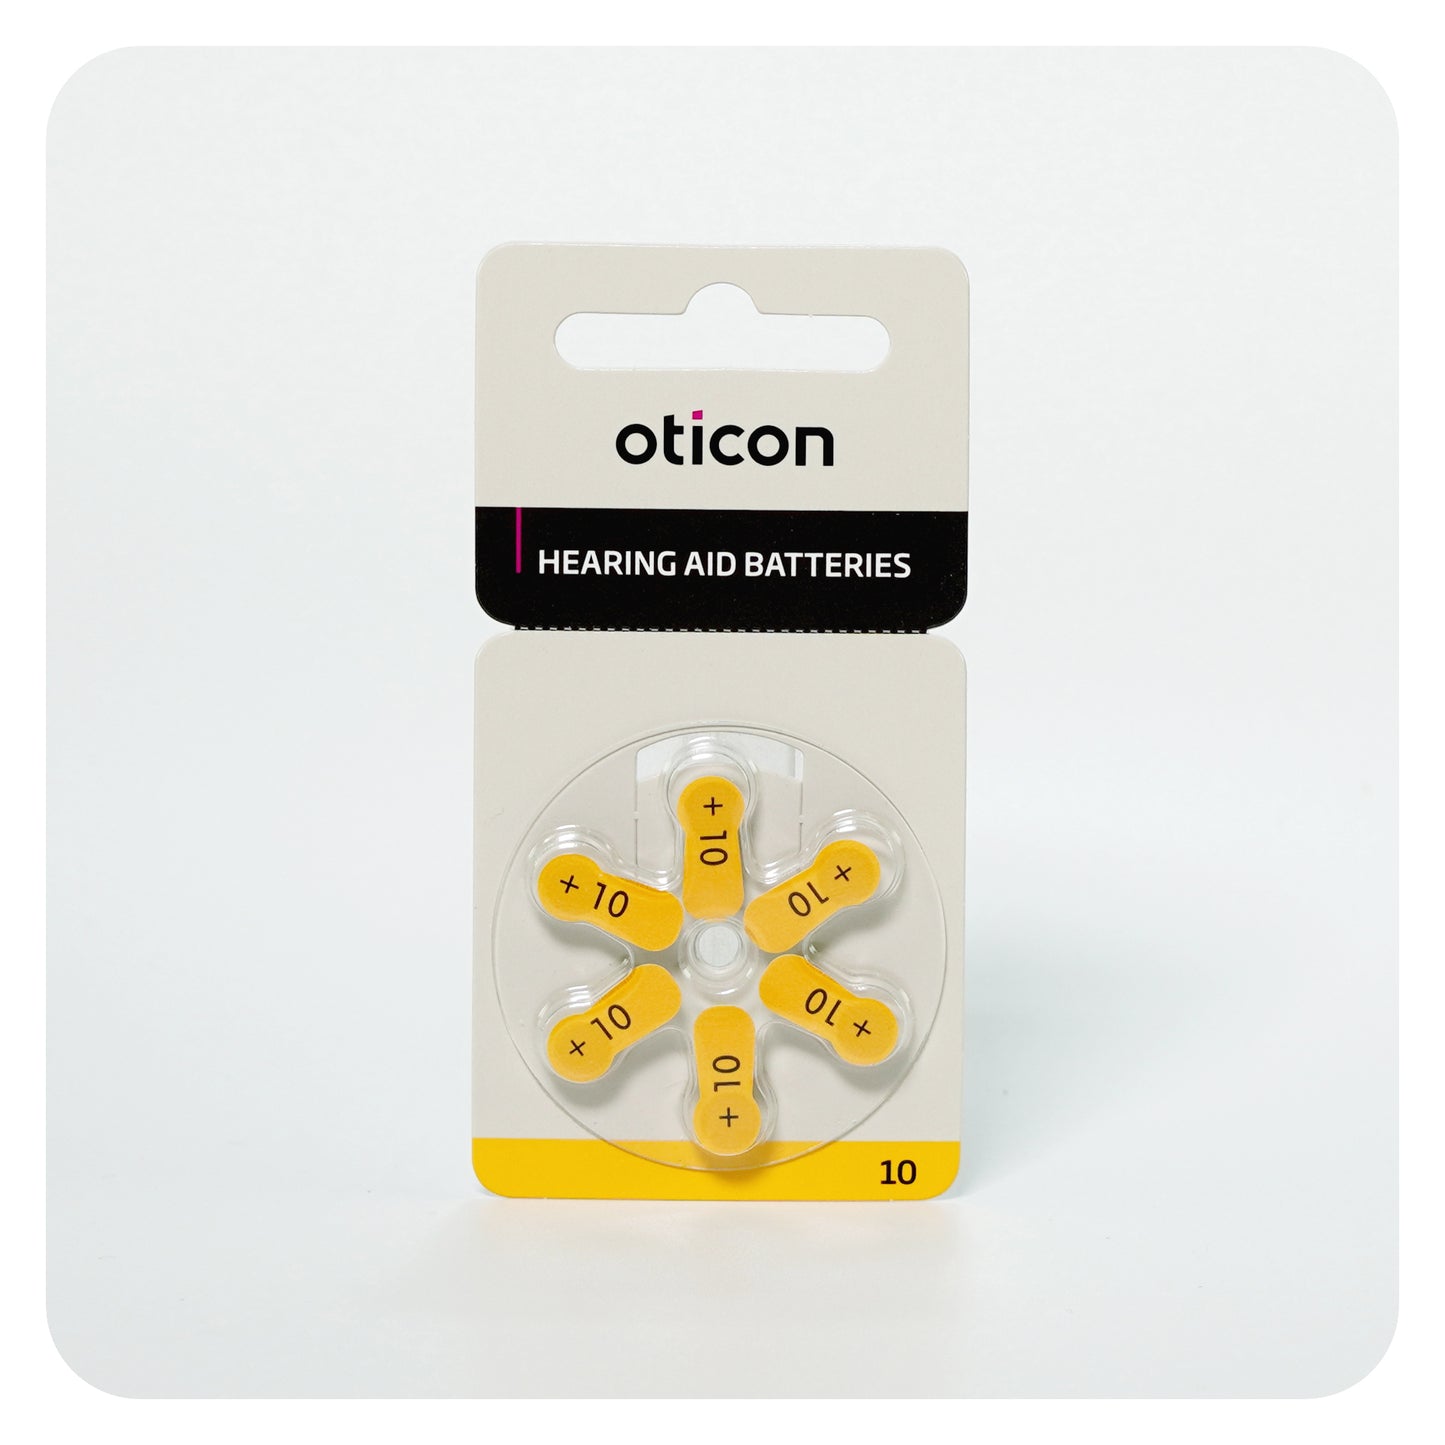 Oticon Hearing Aid Battery Pack - Size 10